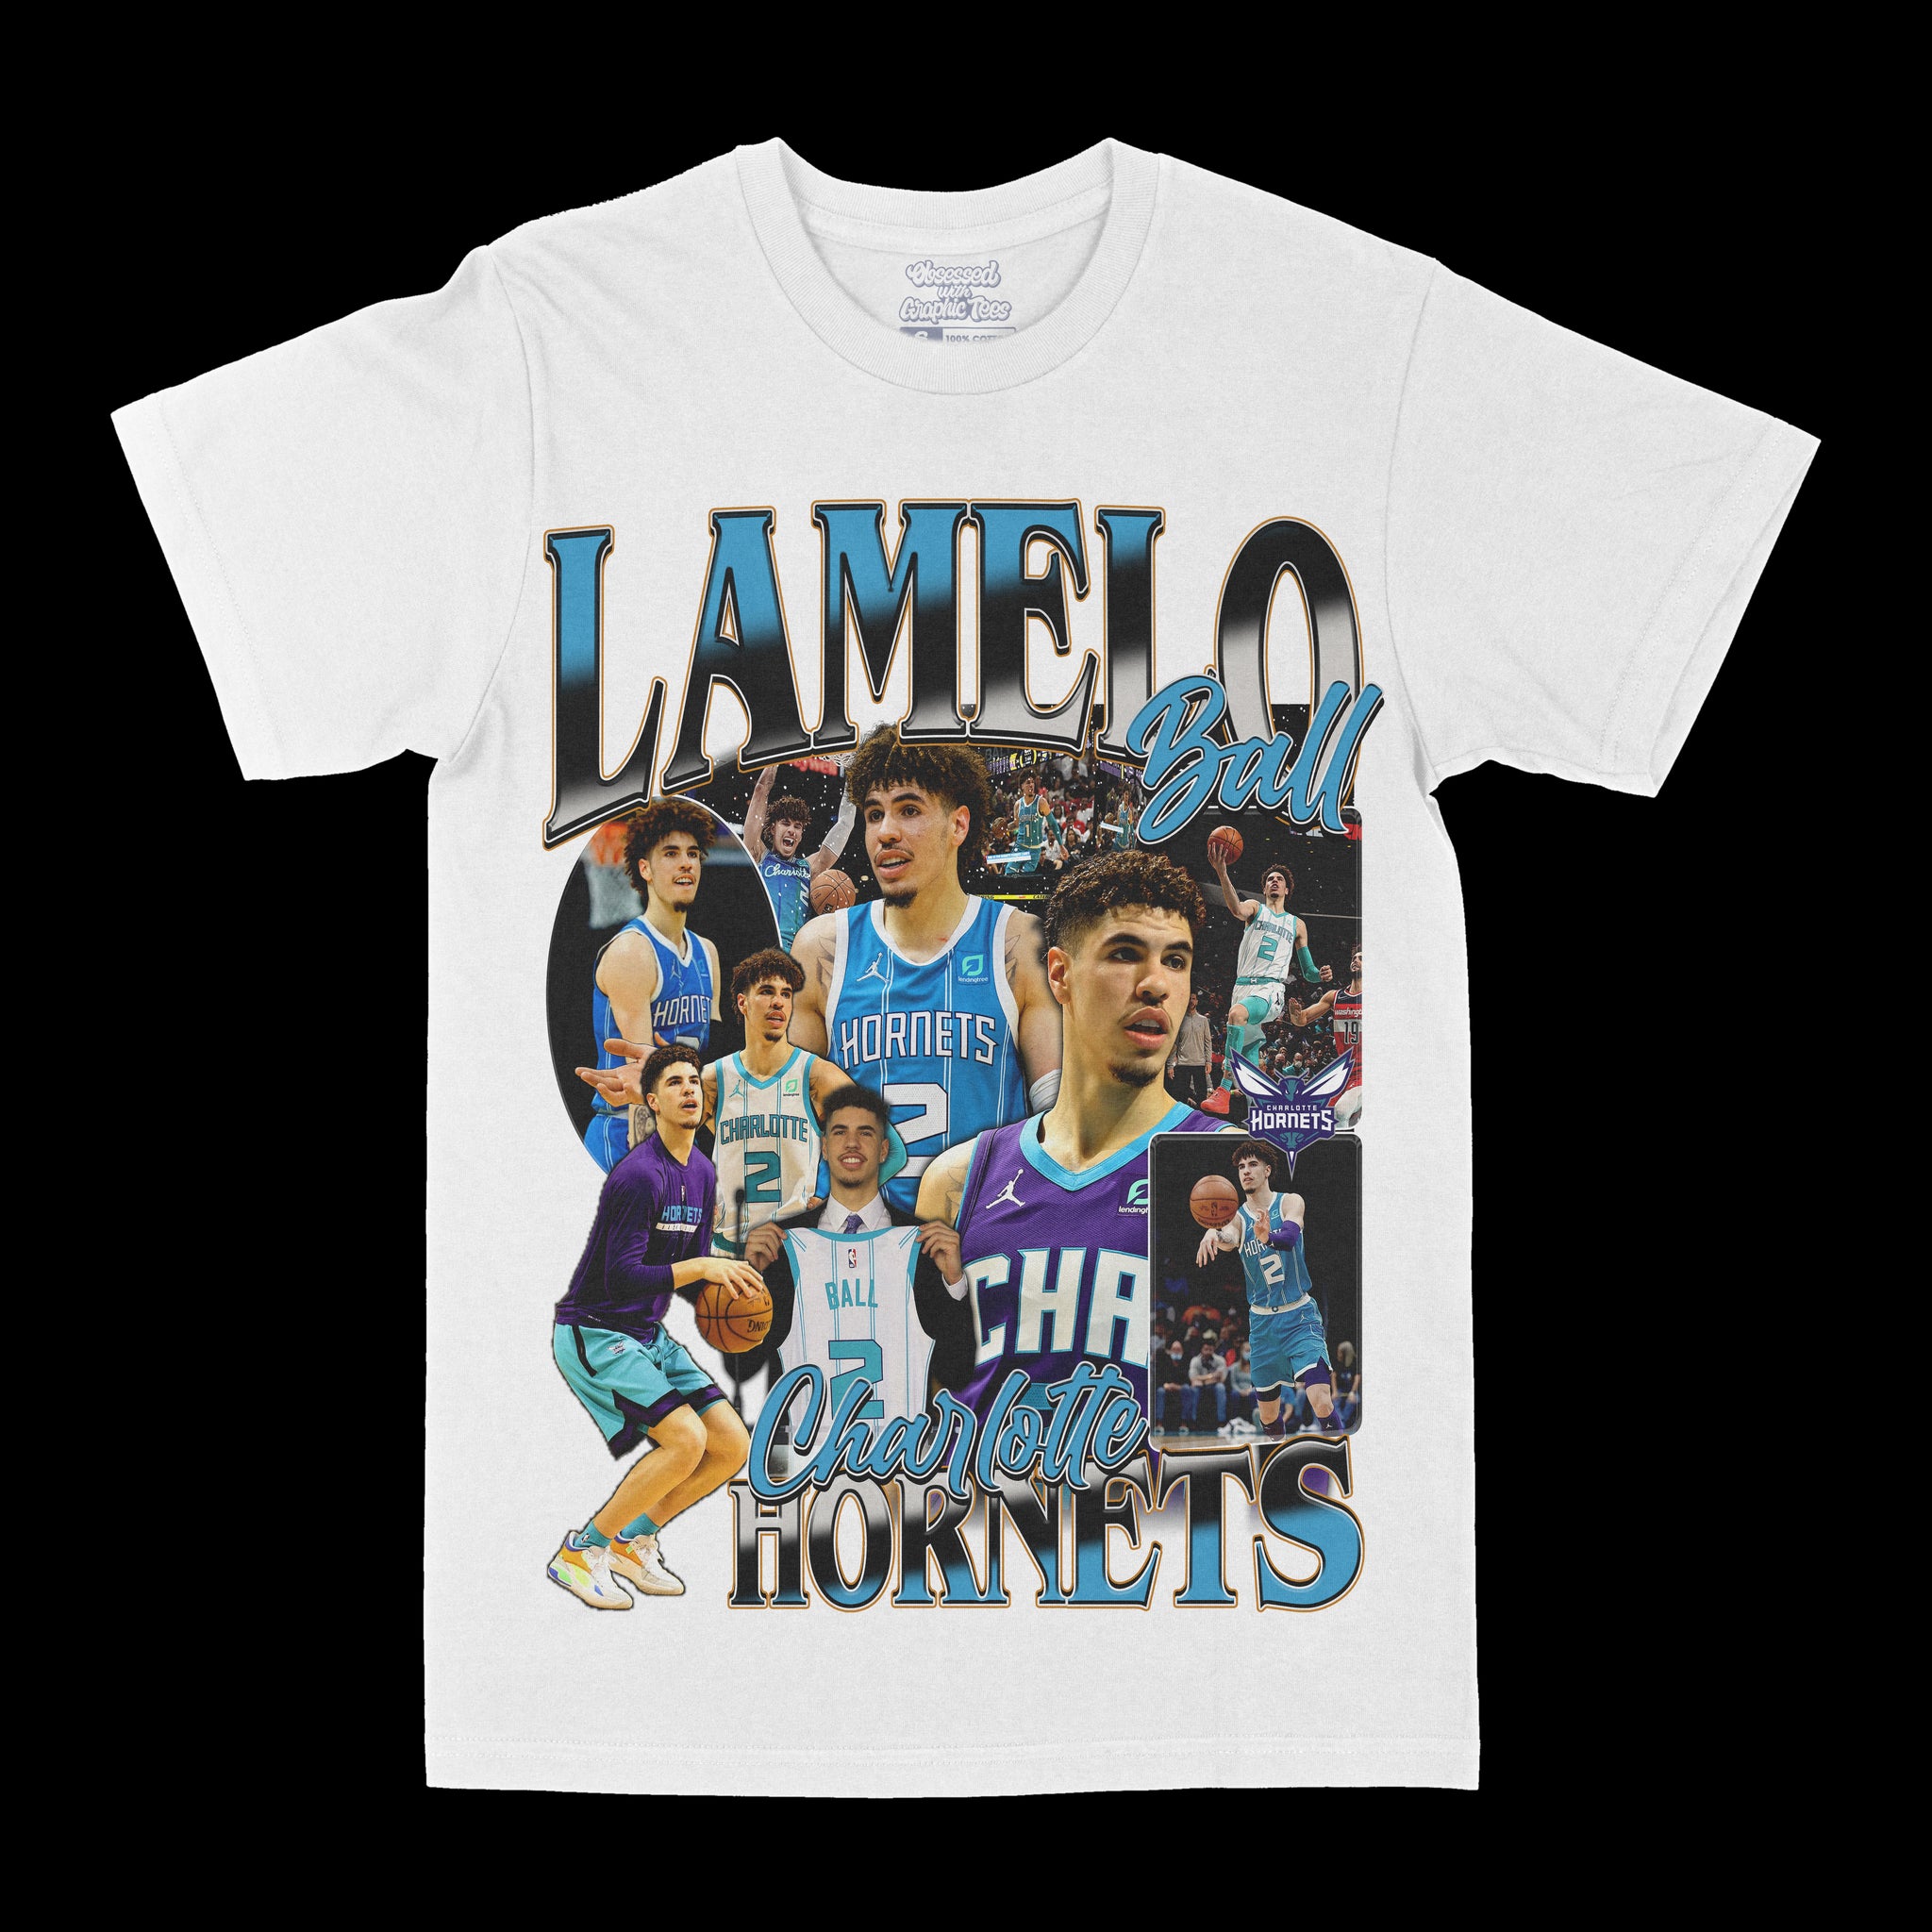 Lamelo Ball "Charlotte Hornets" Graphic Tee